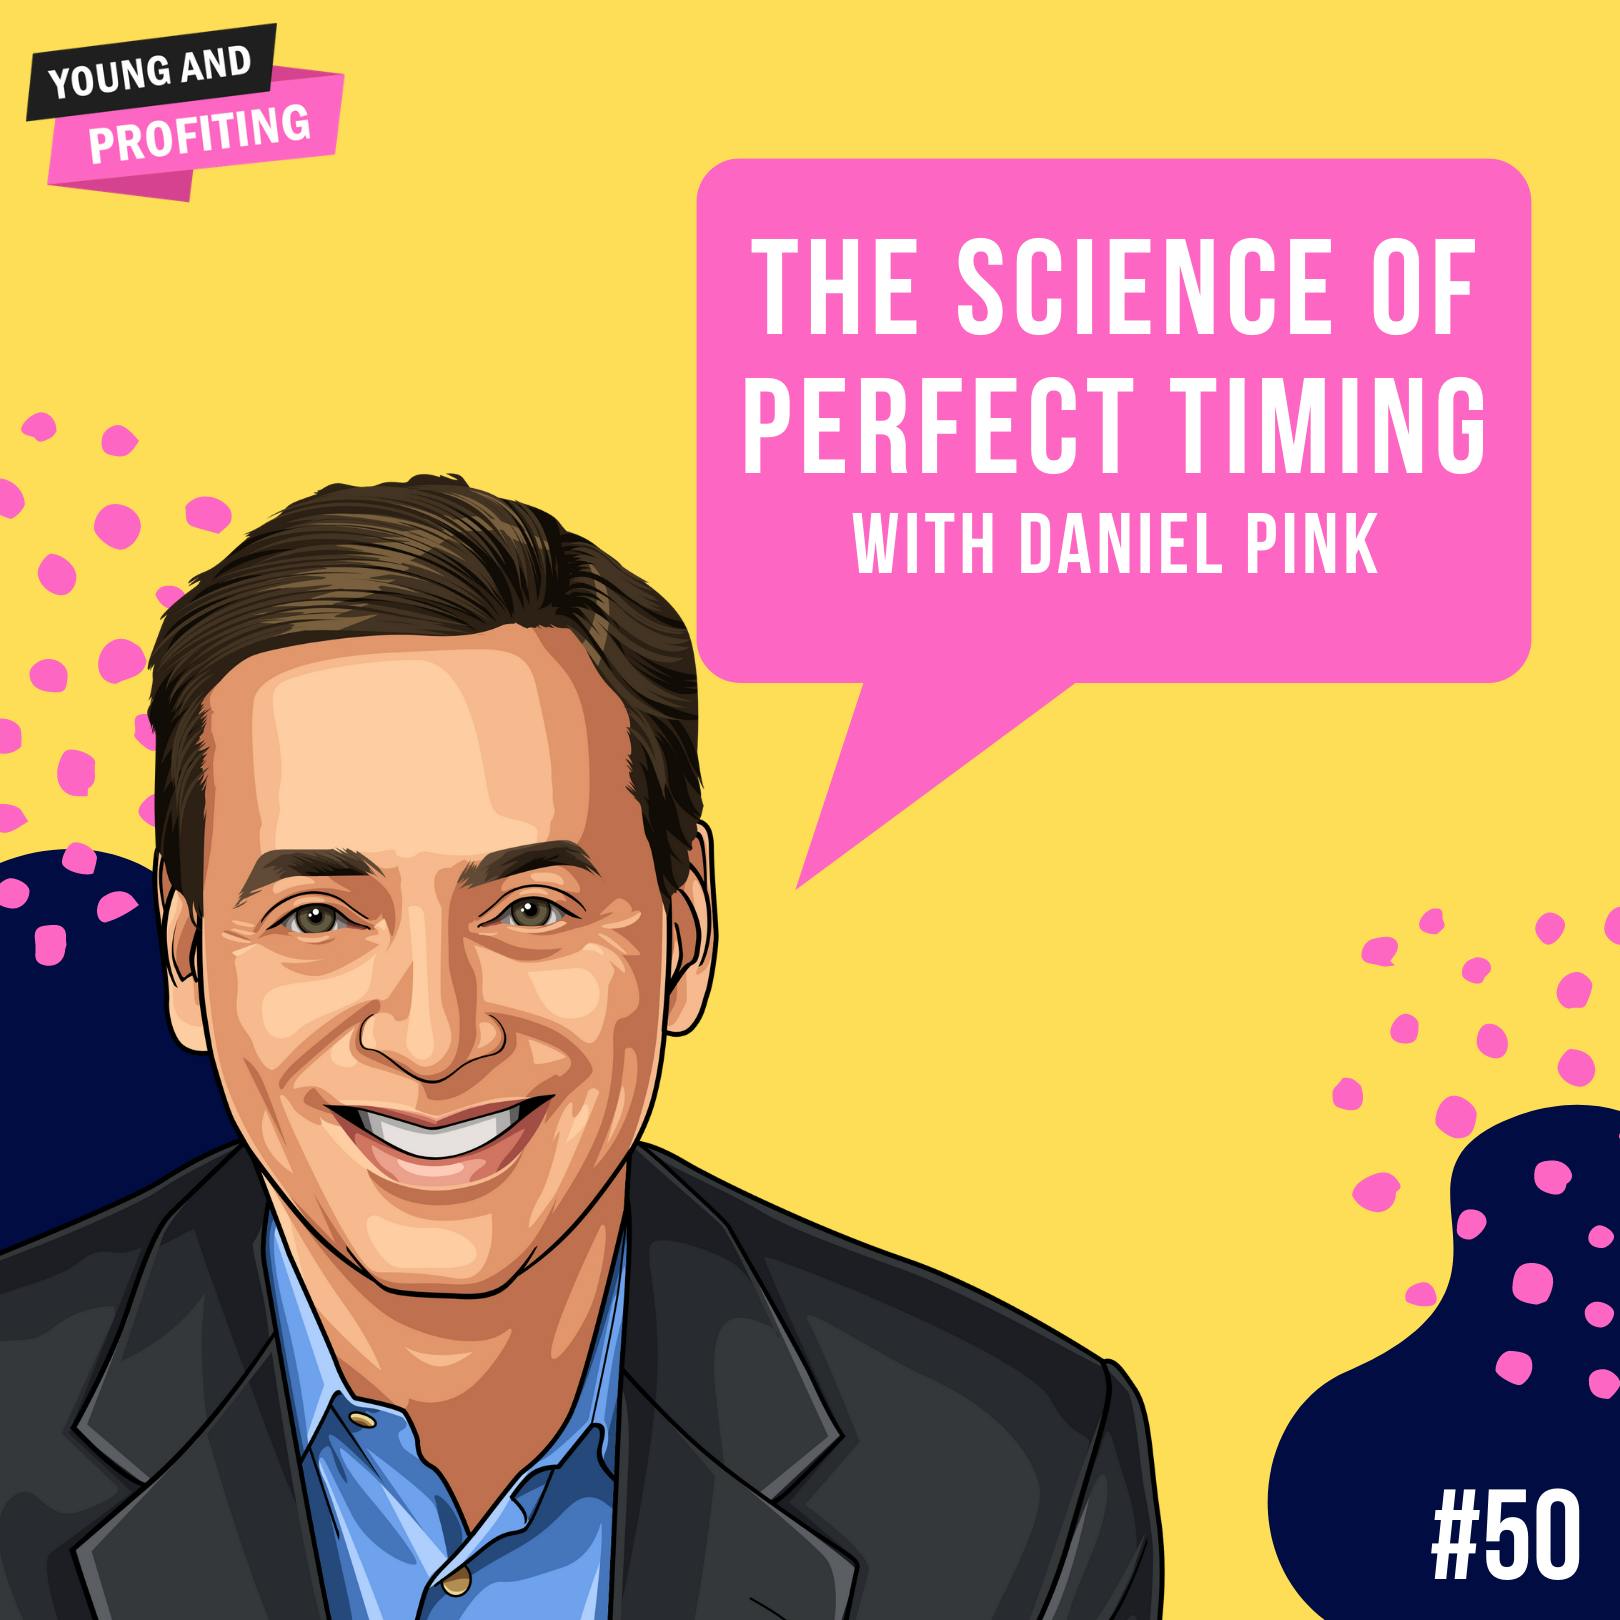 Daniel Pink: The Science of Perfect Timing | E50 by Hala Taha | YAP Media Network